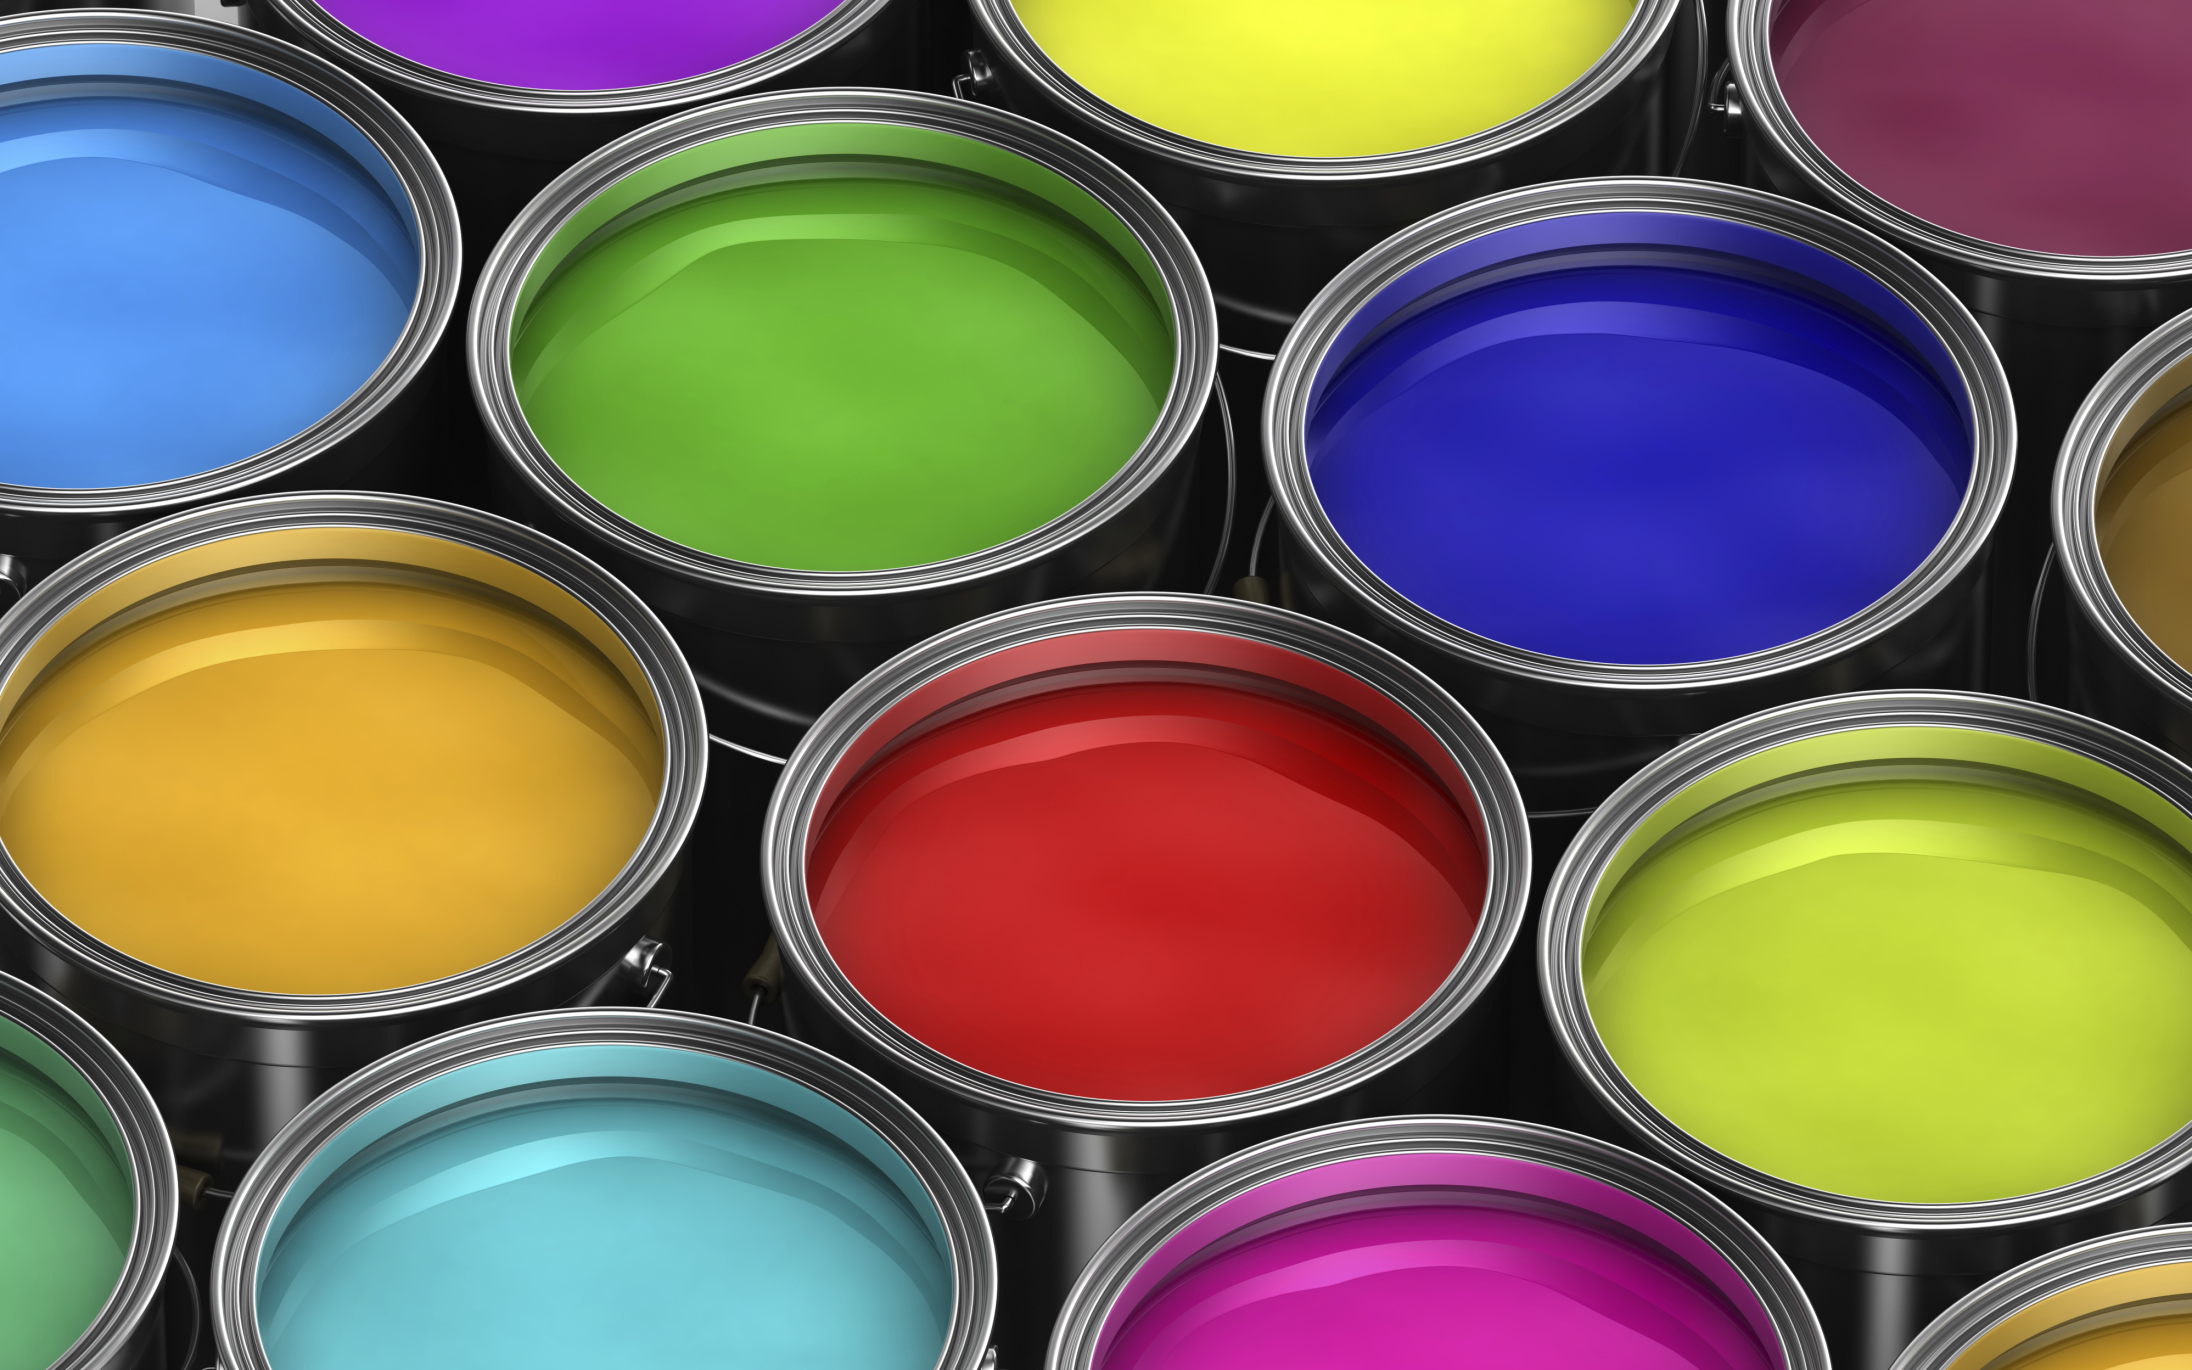 Indian Paint Industry to cross INR 62K crore by 2017: ASSOCHAM